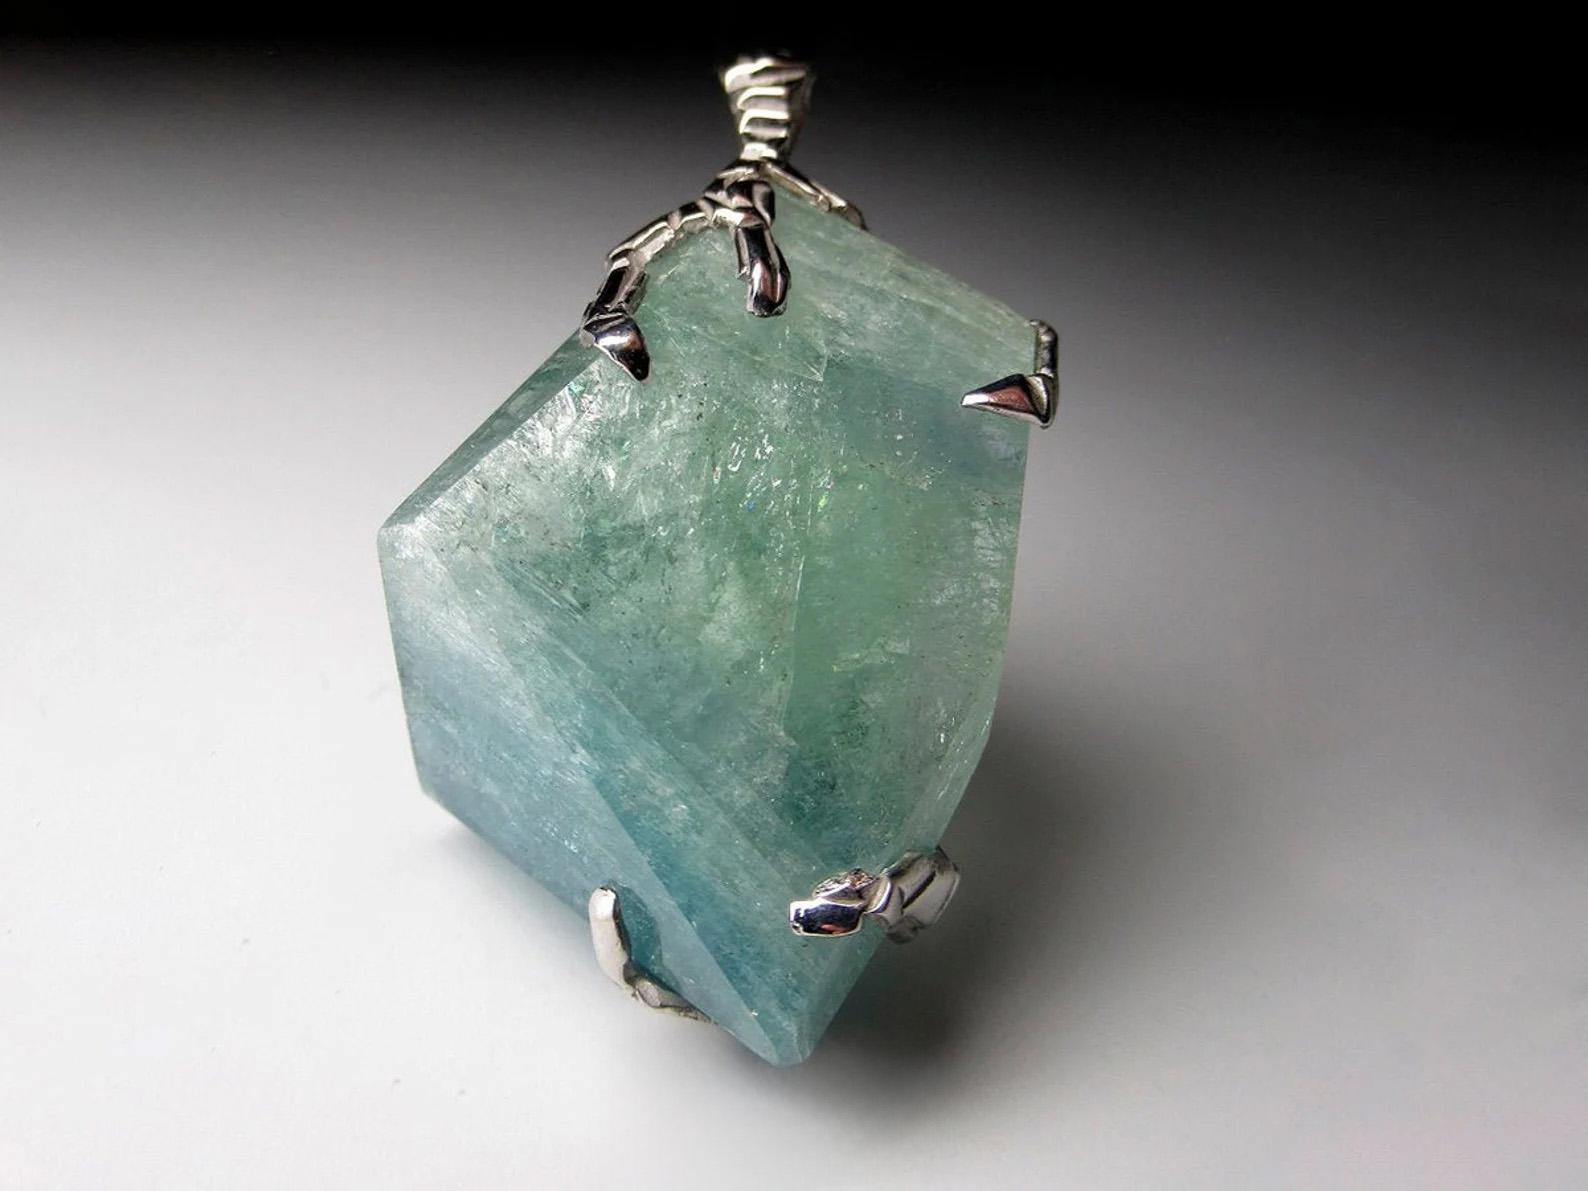 Silver pendant with natural Aquamarine
stone measurements - 0.79 x 0.94 x 1.65 in / 20 x 24 x 42 mm
stone weight - 108.85 carats
pendant length - 2.09 in / 53 mm
pendant weight - 26.37 grams
